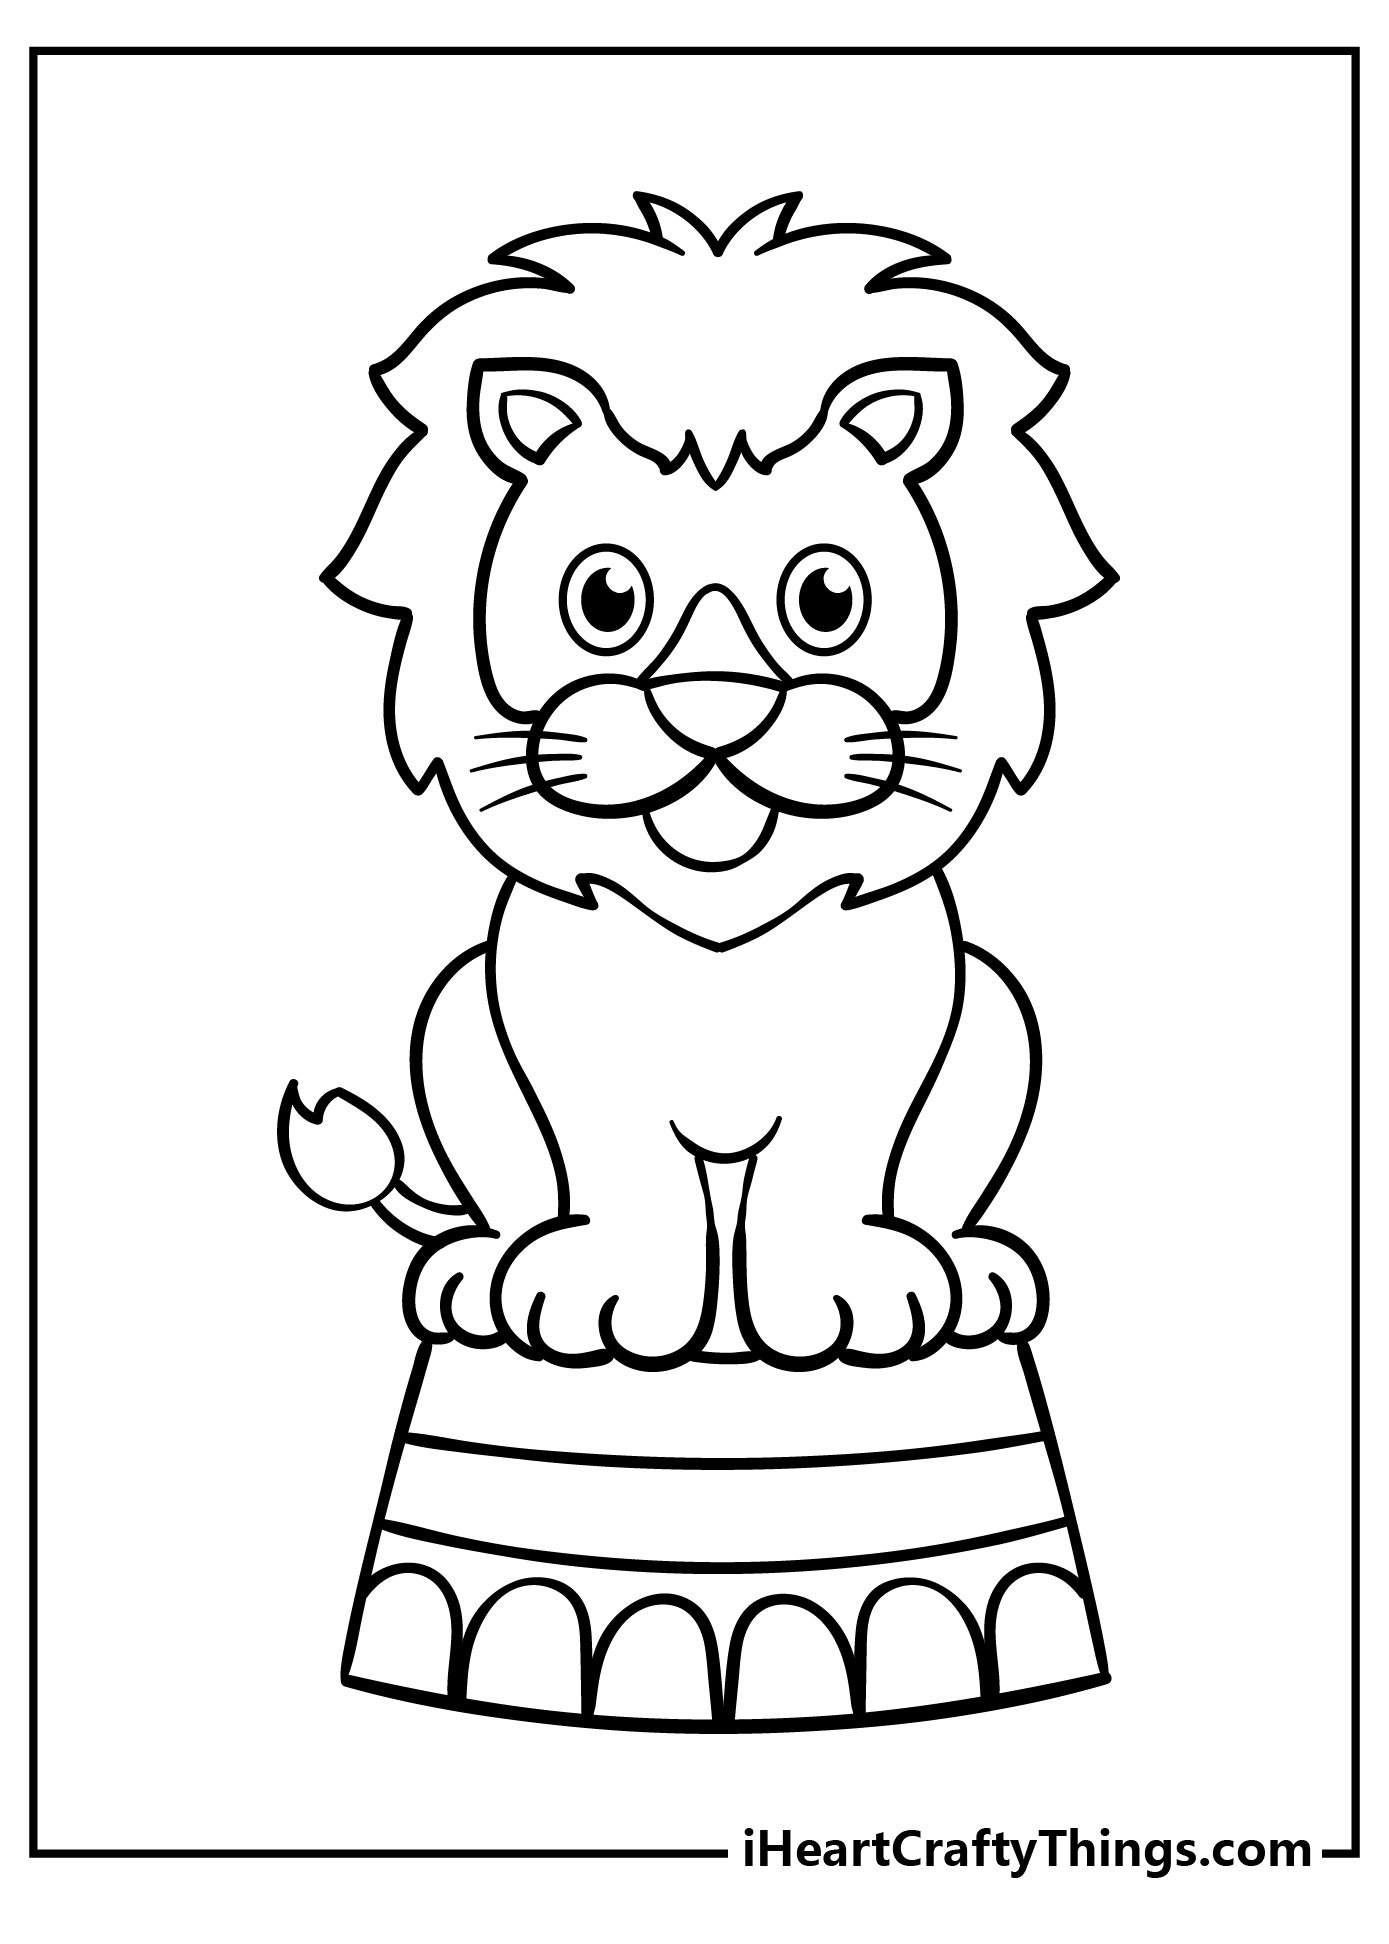 Circus Coloring Pages for kids free download